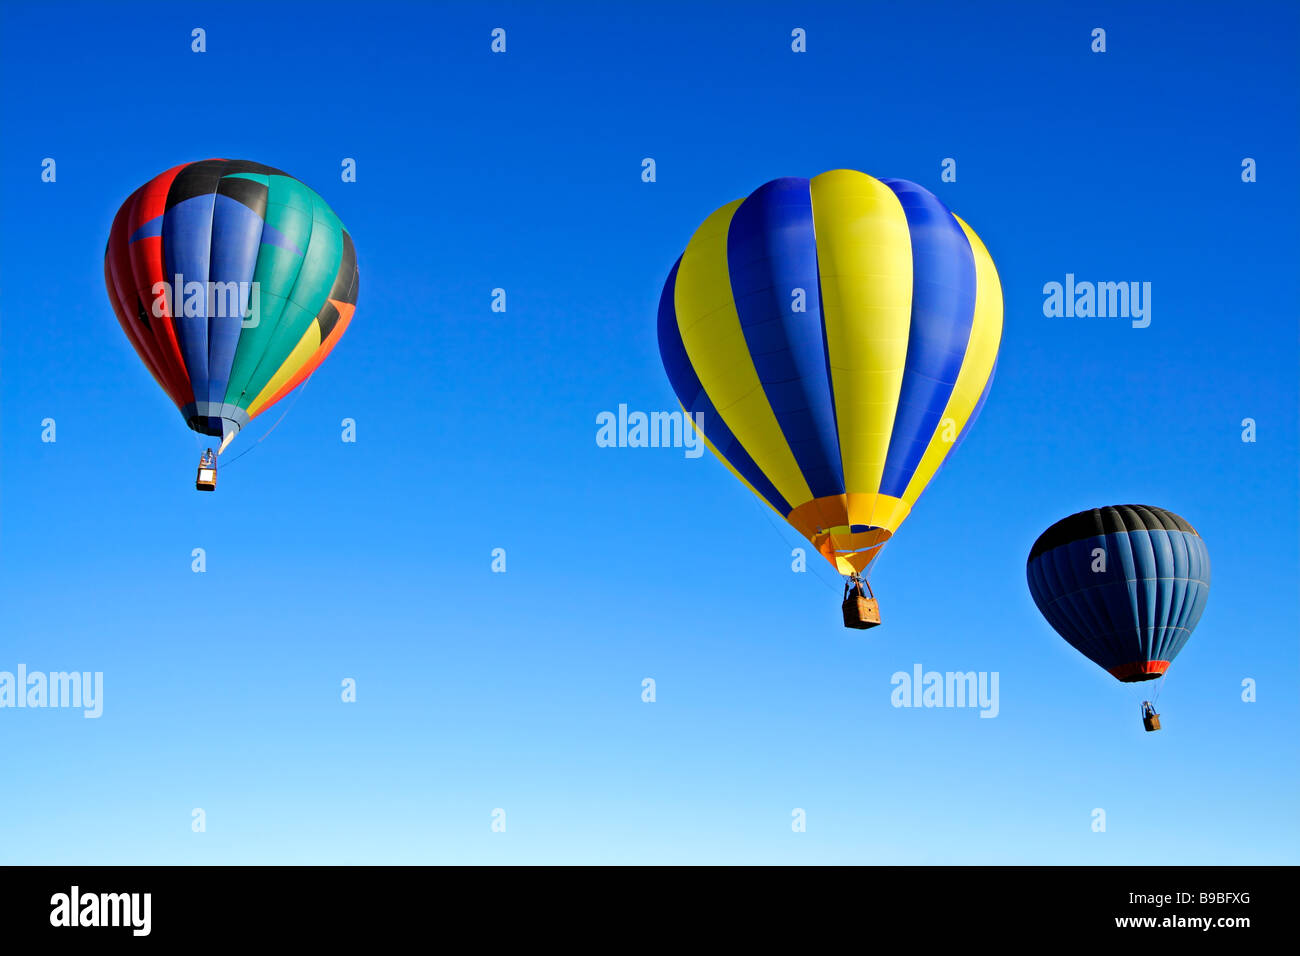 Colorful hot air balloons against a clear blue sky Stock Photo